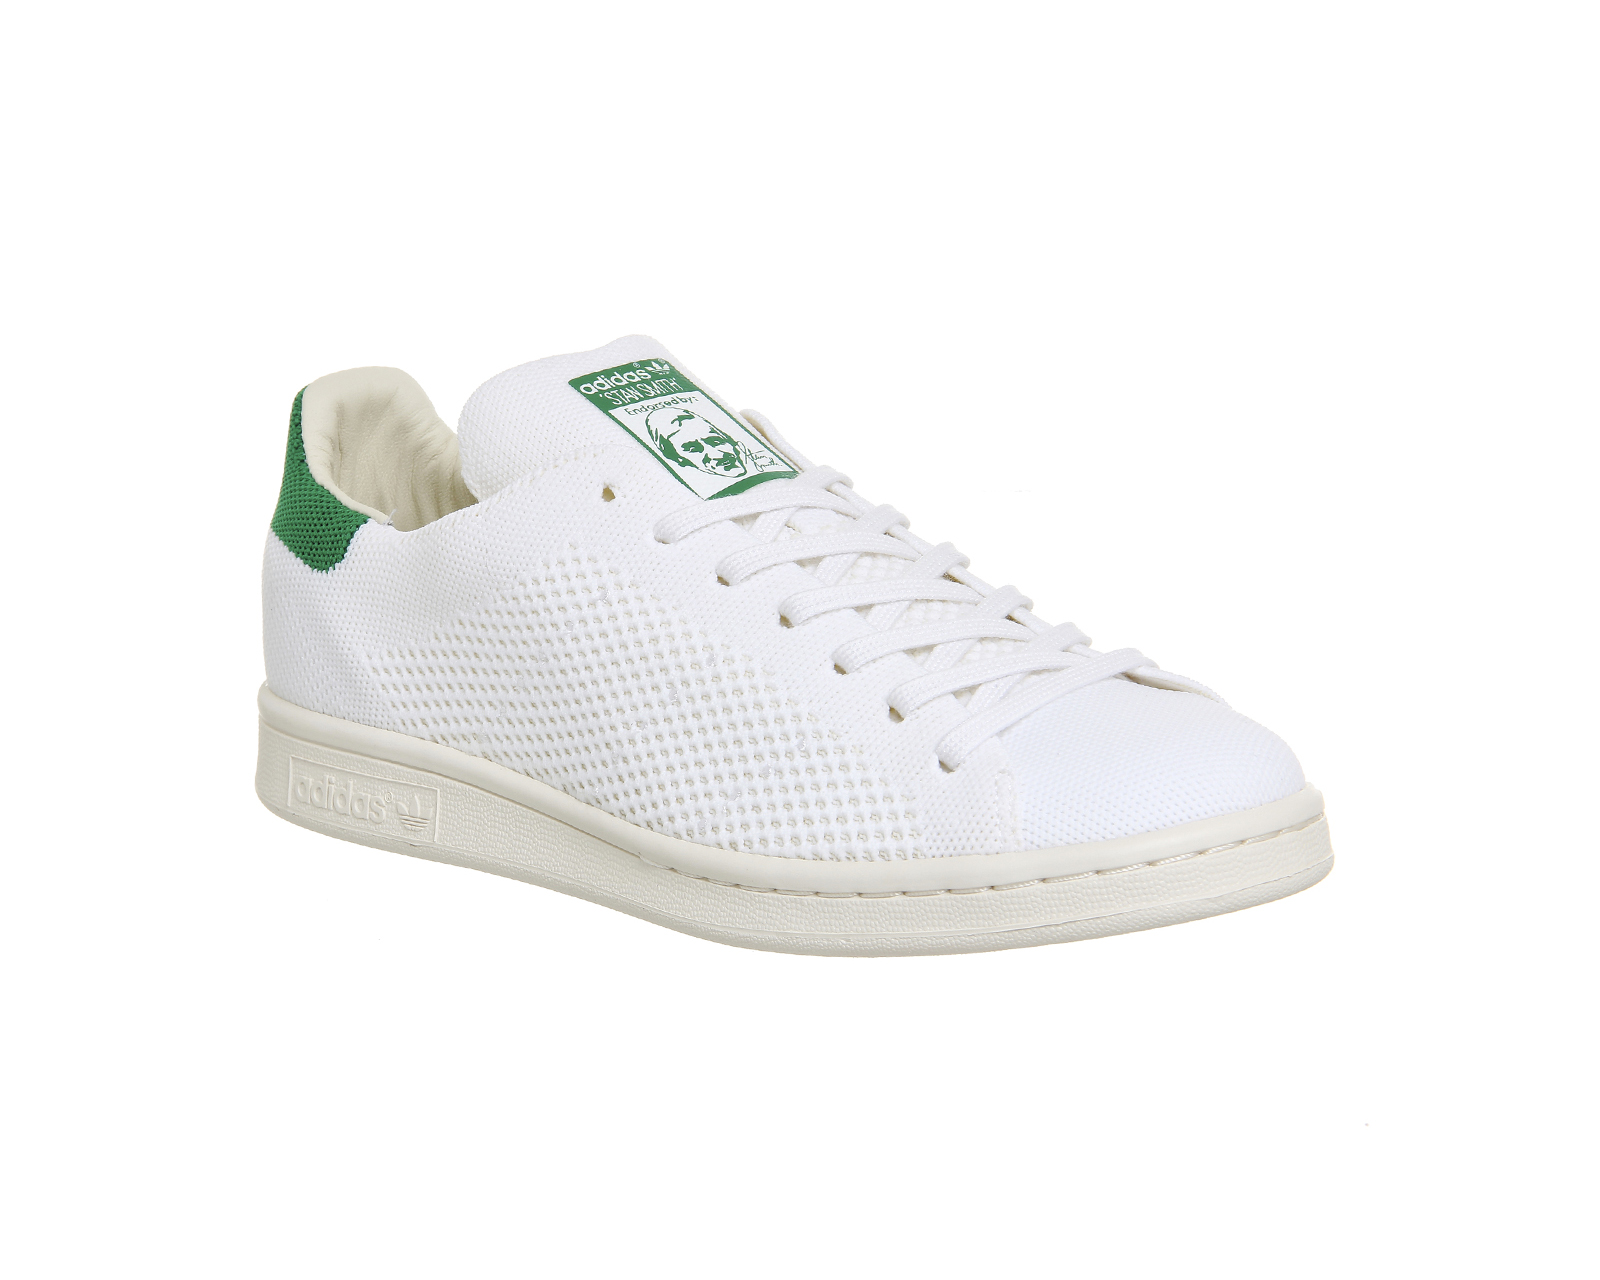 adidas Stan Smith White Green Prime Knit - Hers trainers